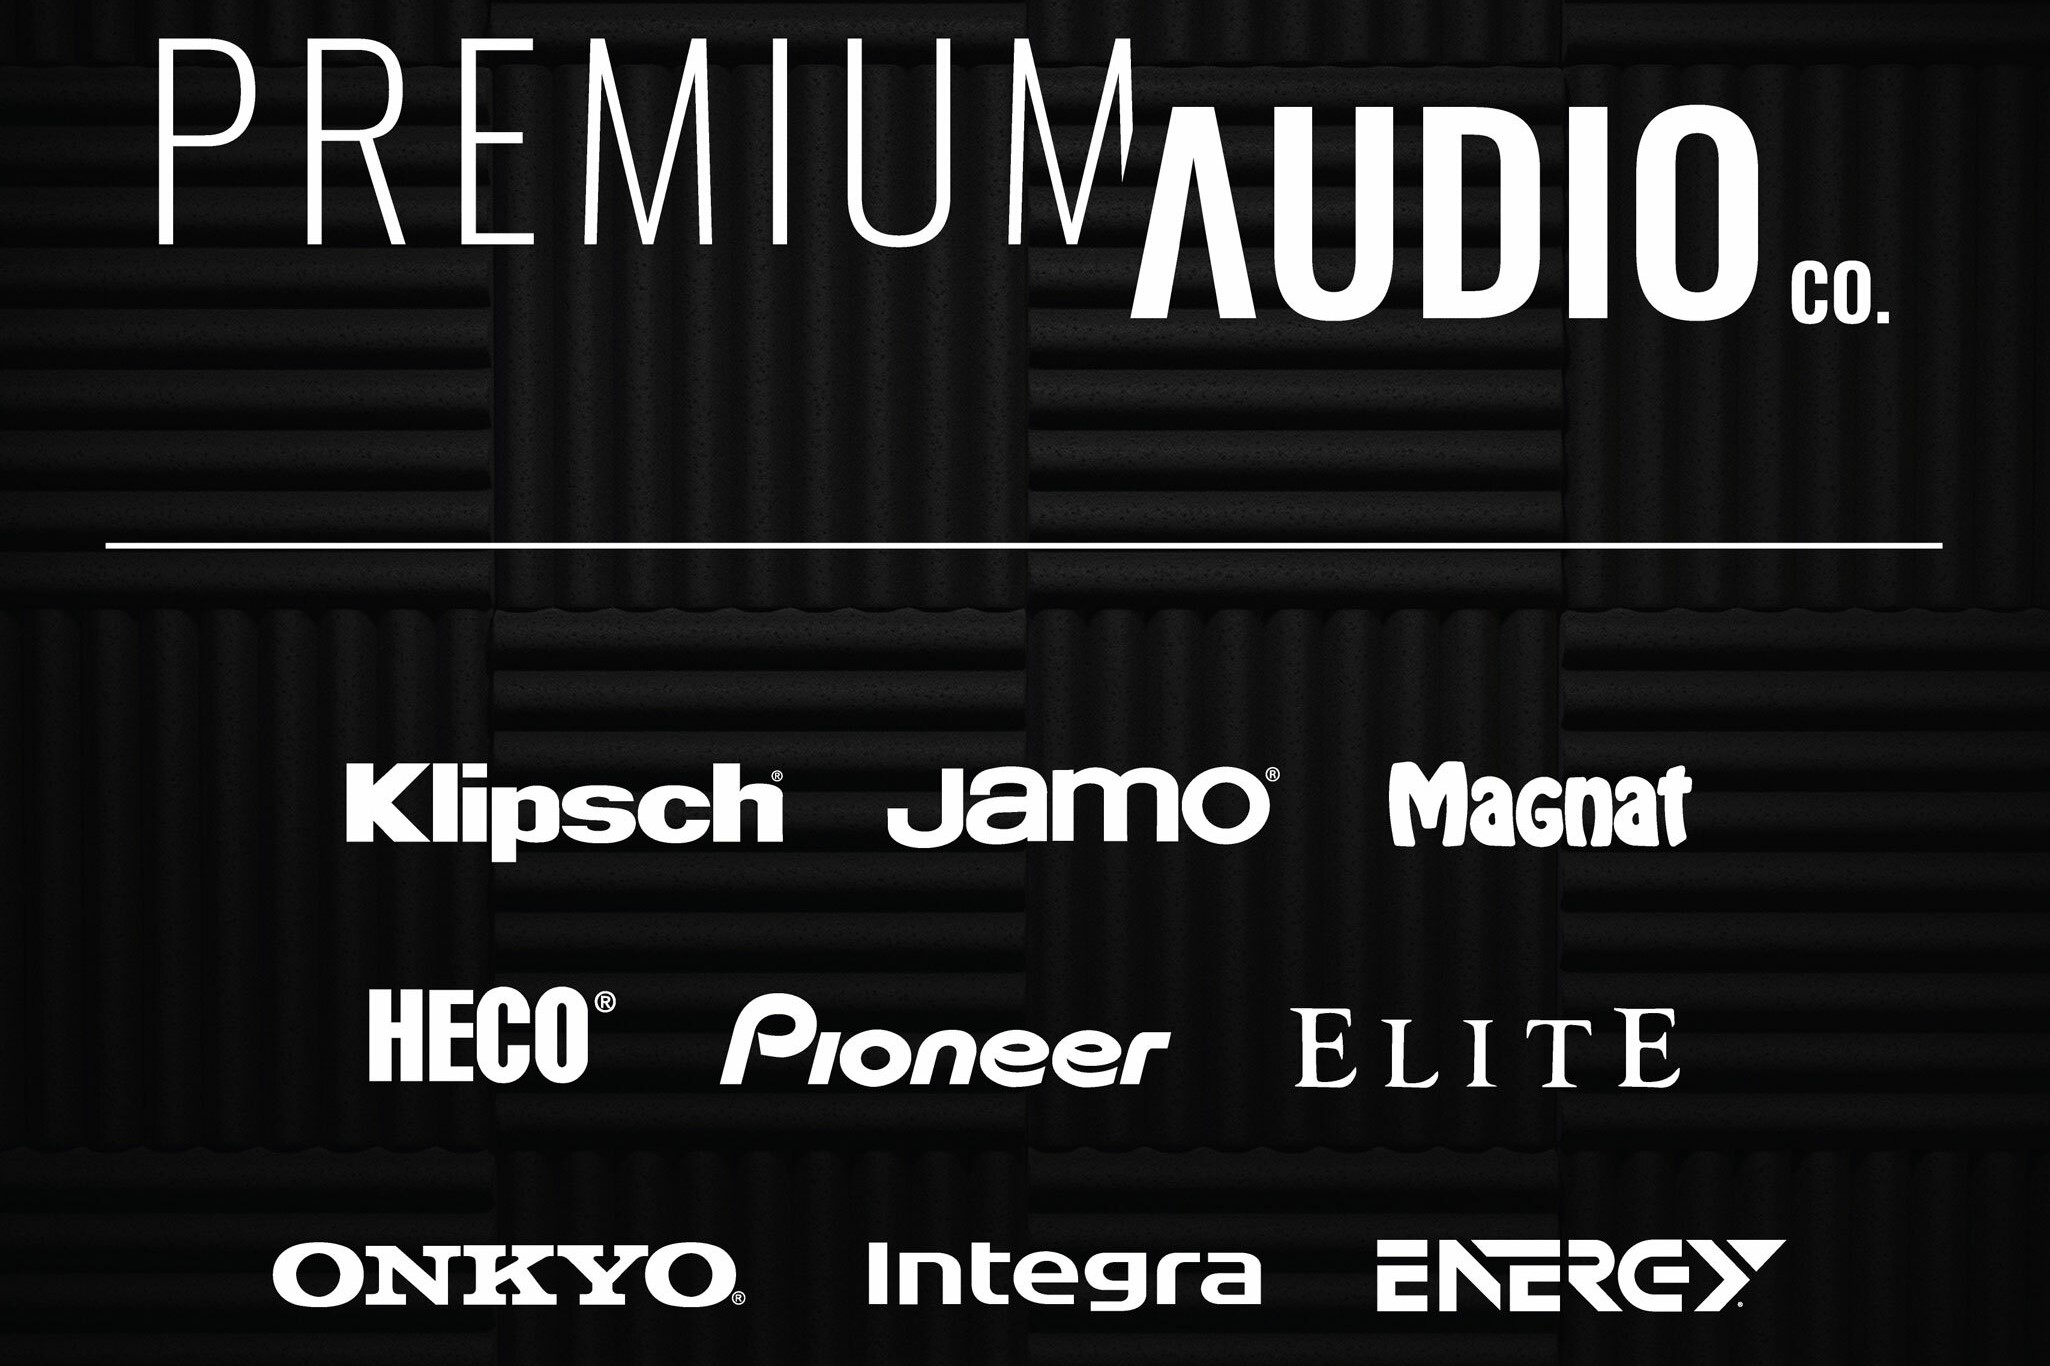 Premium Audio Company, LLC Confirms Commitment To Onkyo Brand Following Outside Bankruptcy Filing